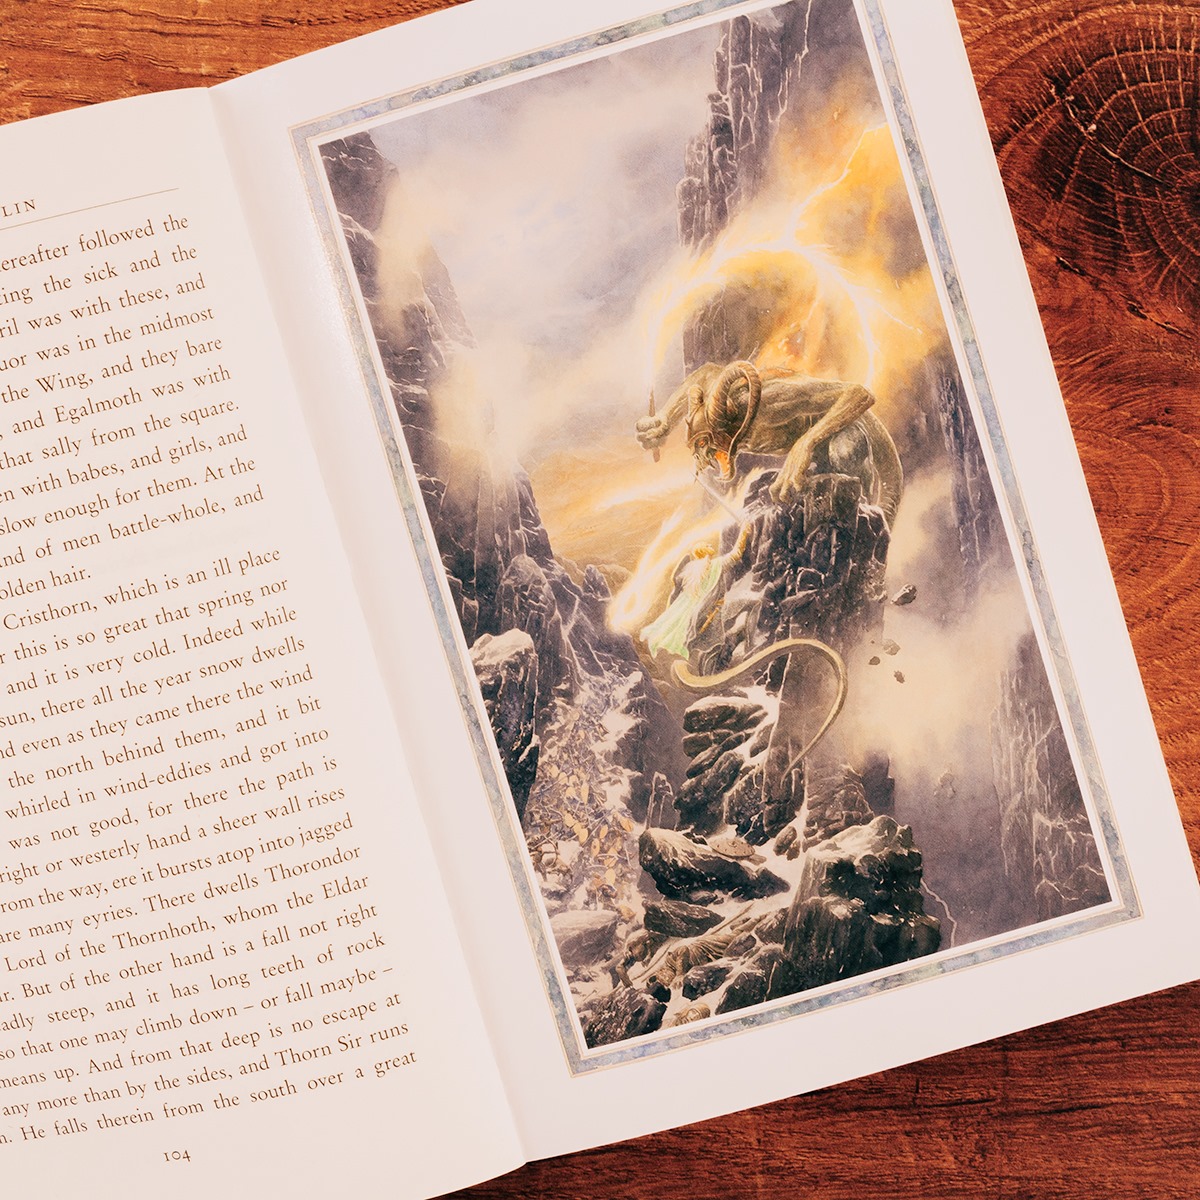 Lord of the Rings: Differenze tra libri e film